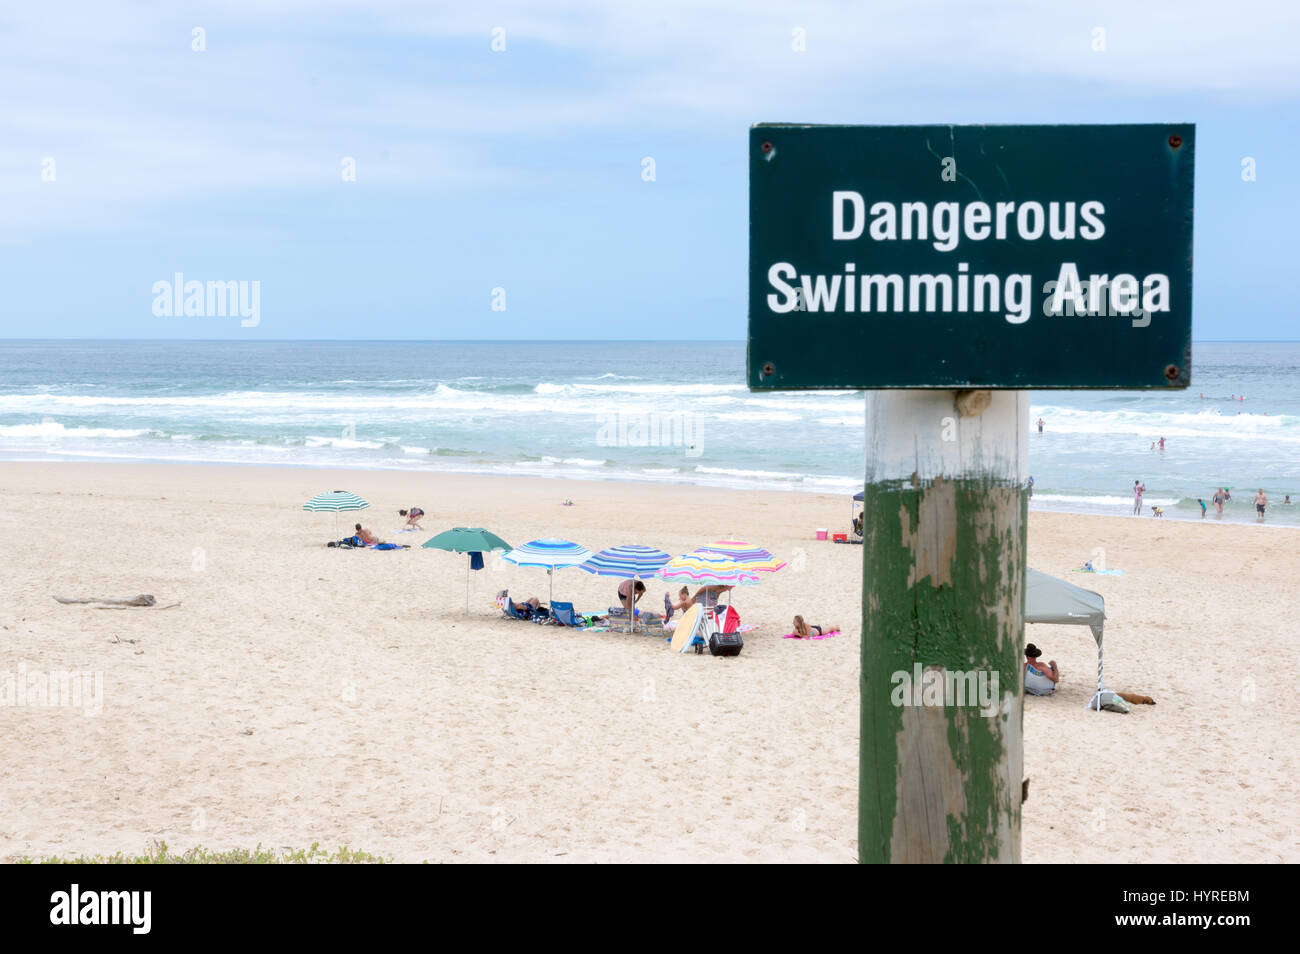 Dangerous Swiming Area Nature Walley Beach South Africa Stock Photo